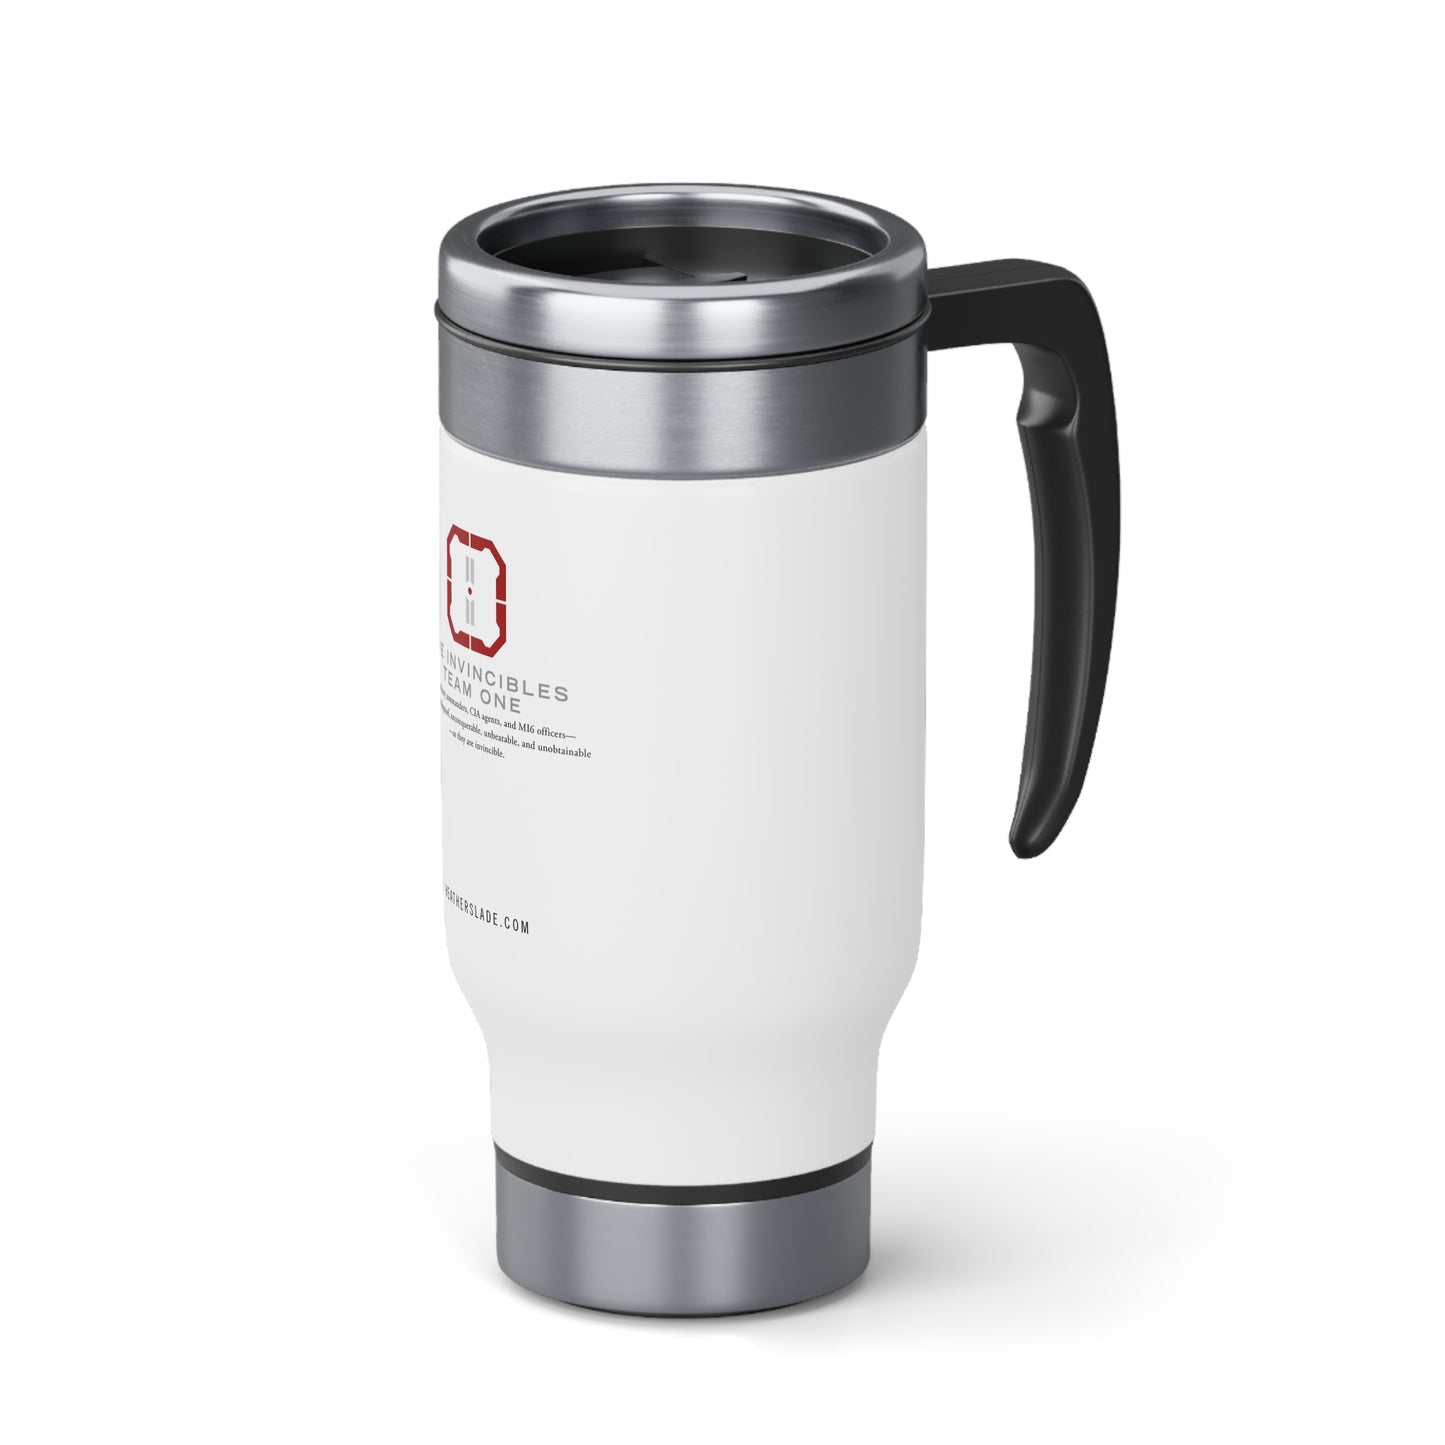 The Invincibles Team One Stainless Steel Travel Mug with Handle, 14oz